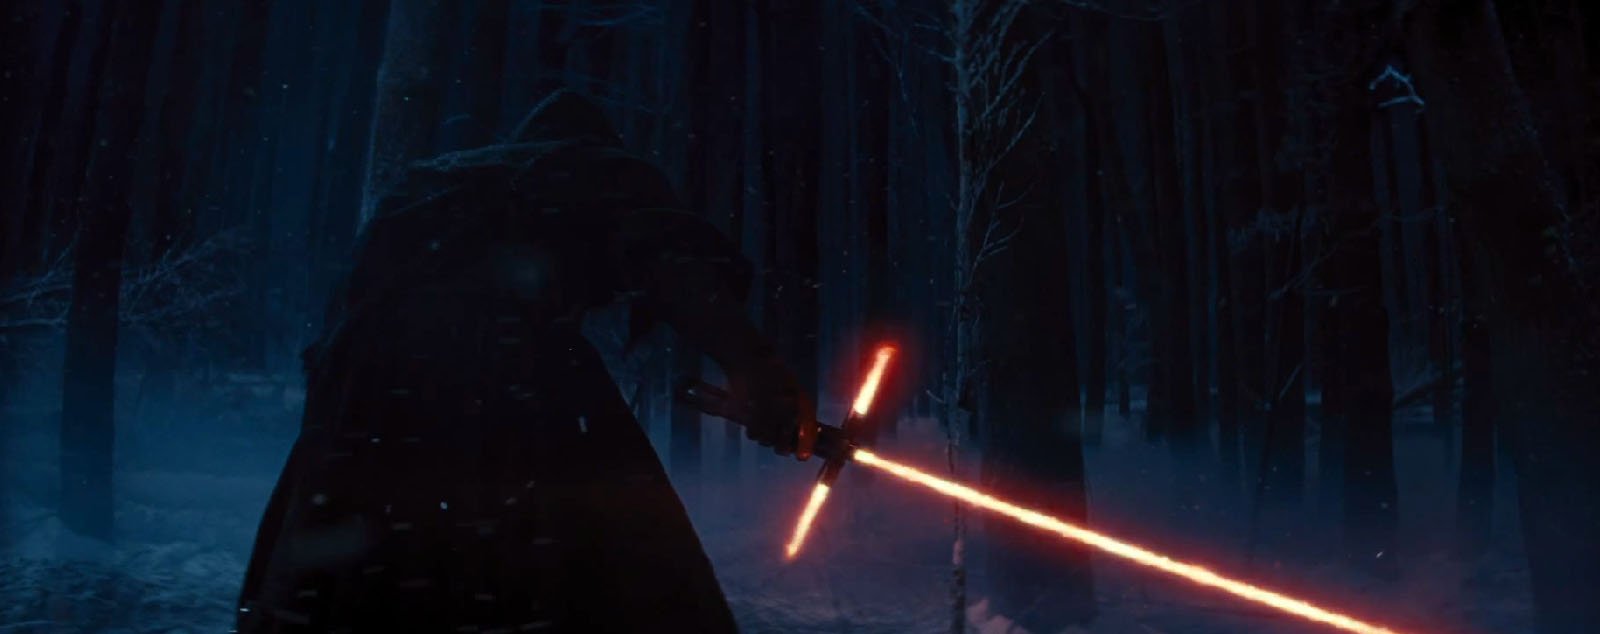 Star Wars: The Force Awakens (2016) Review 7